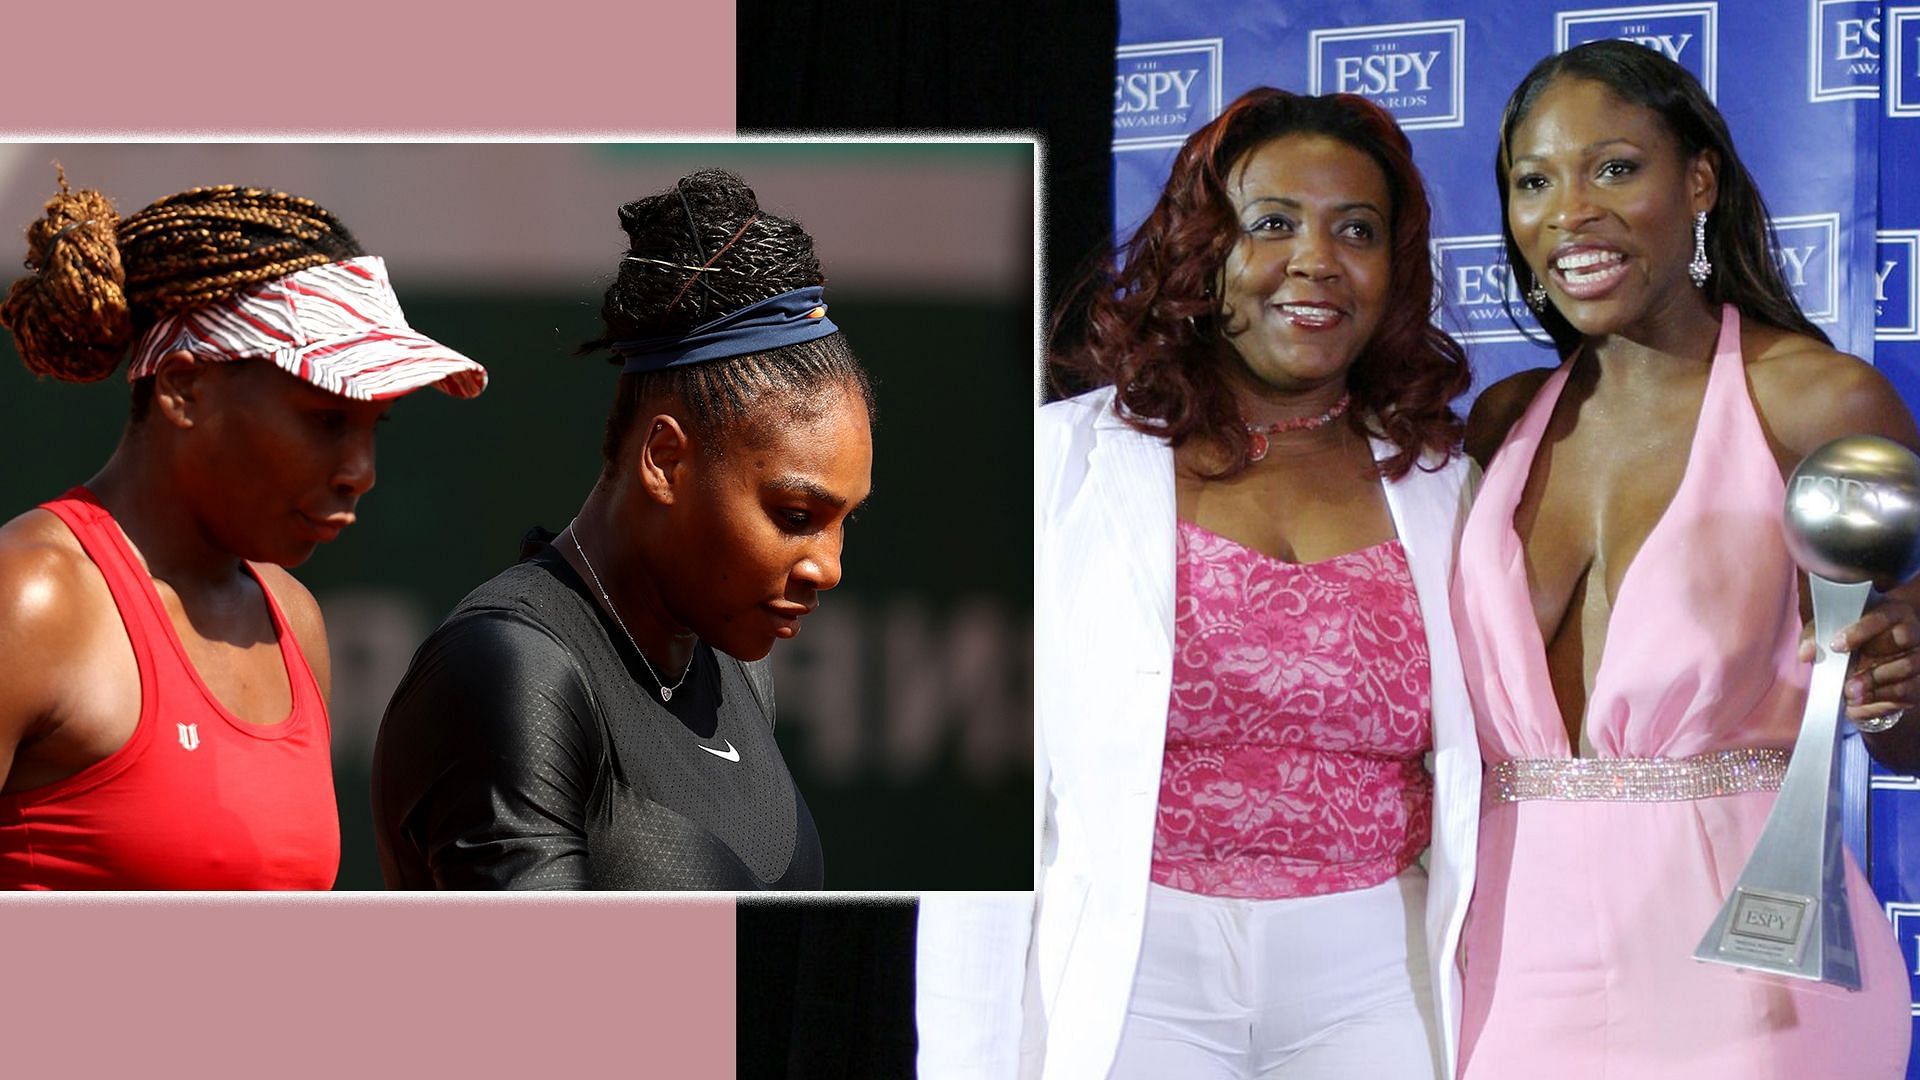 Serena and Venus' sister calls dad a 'sperm donor' who abandoned